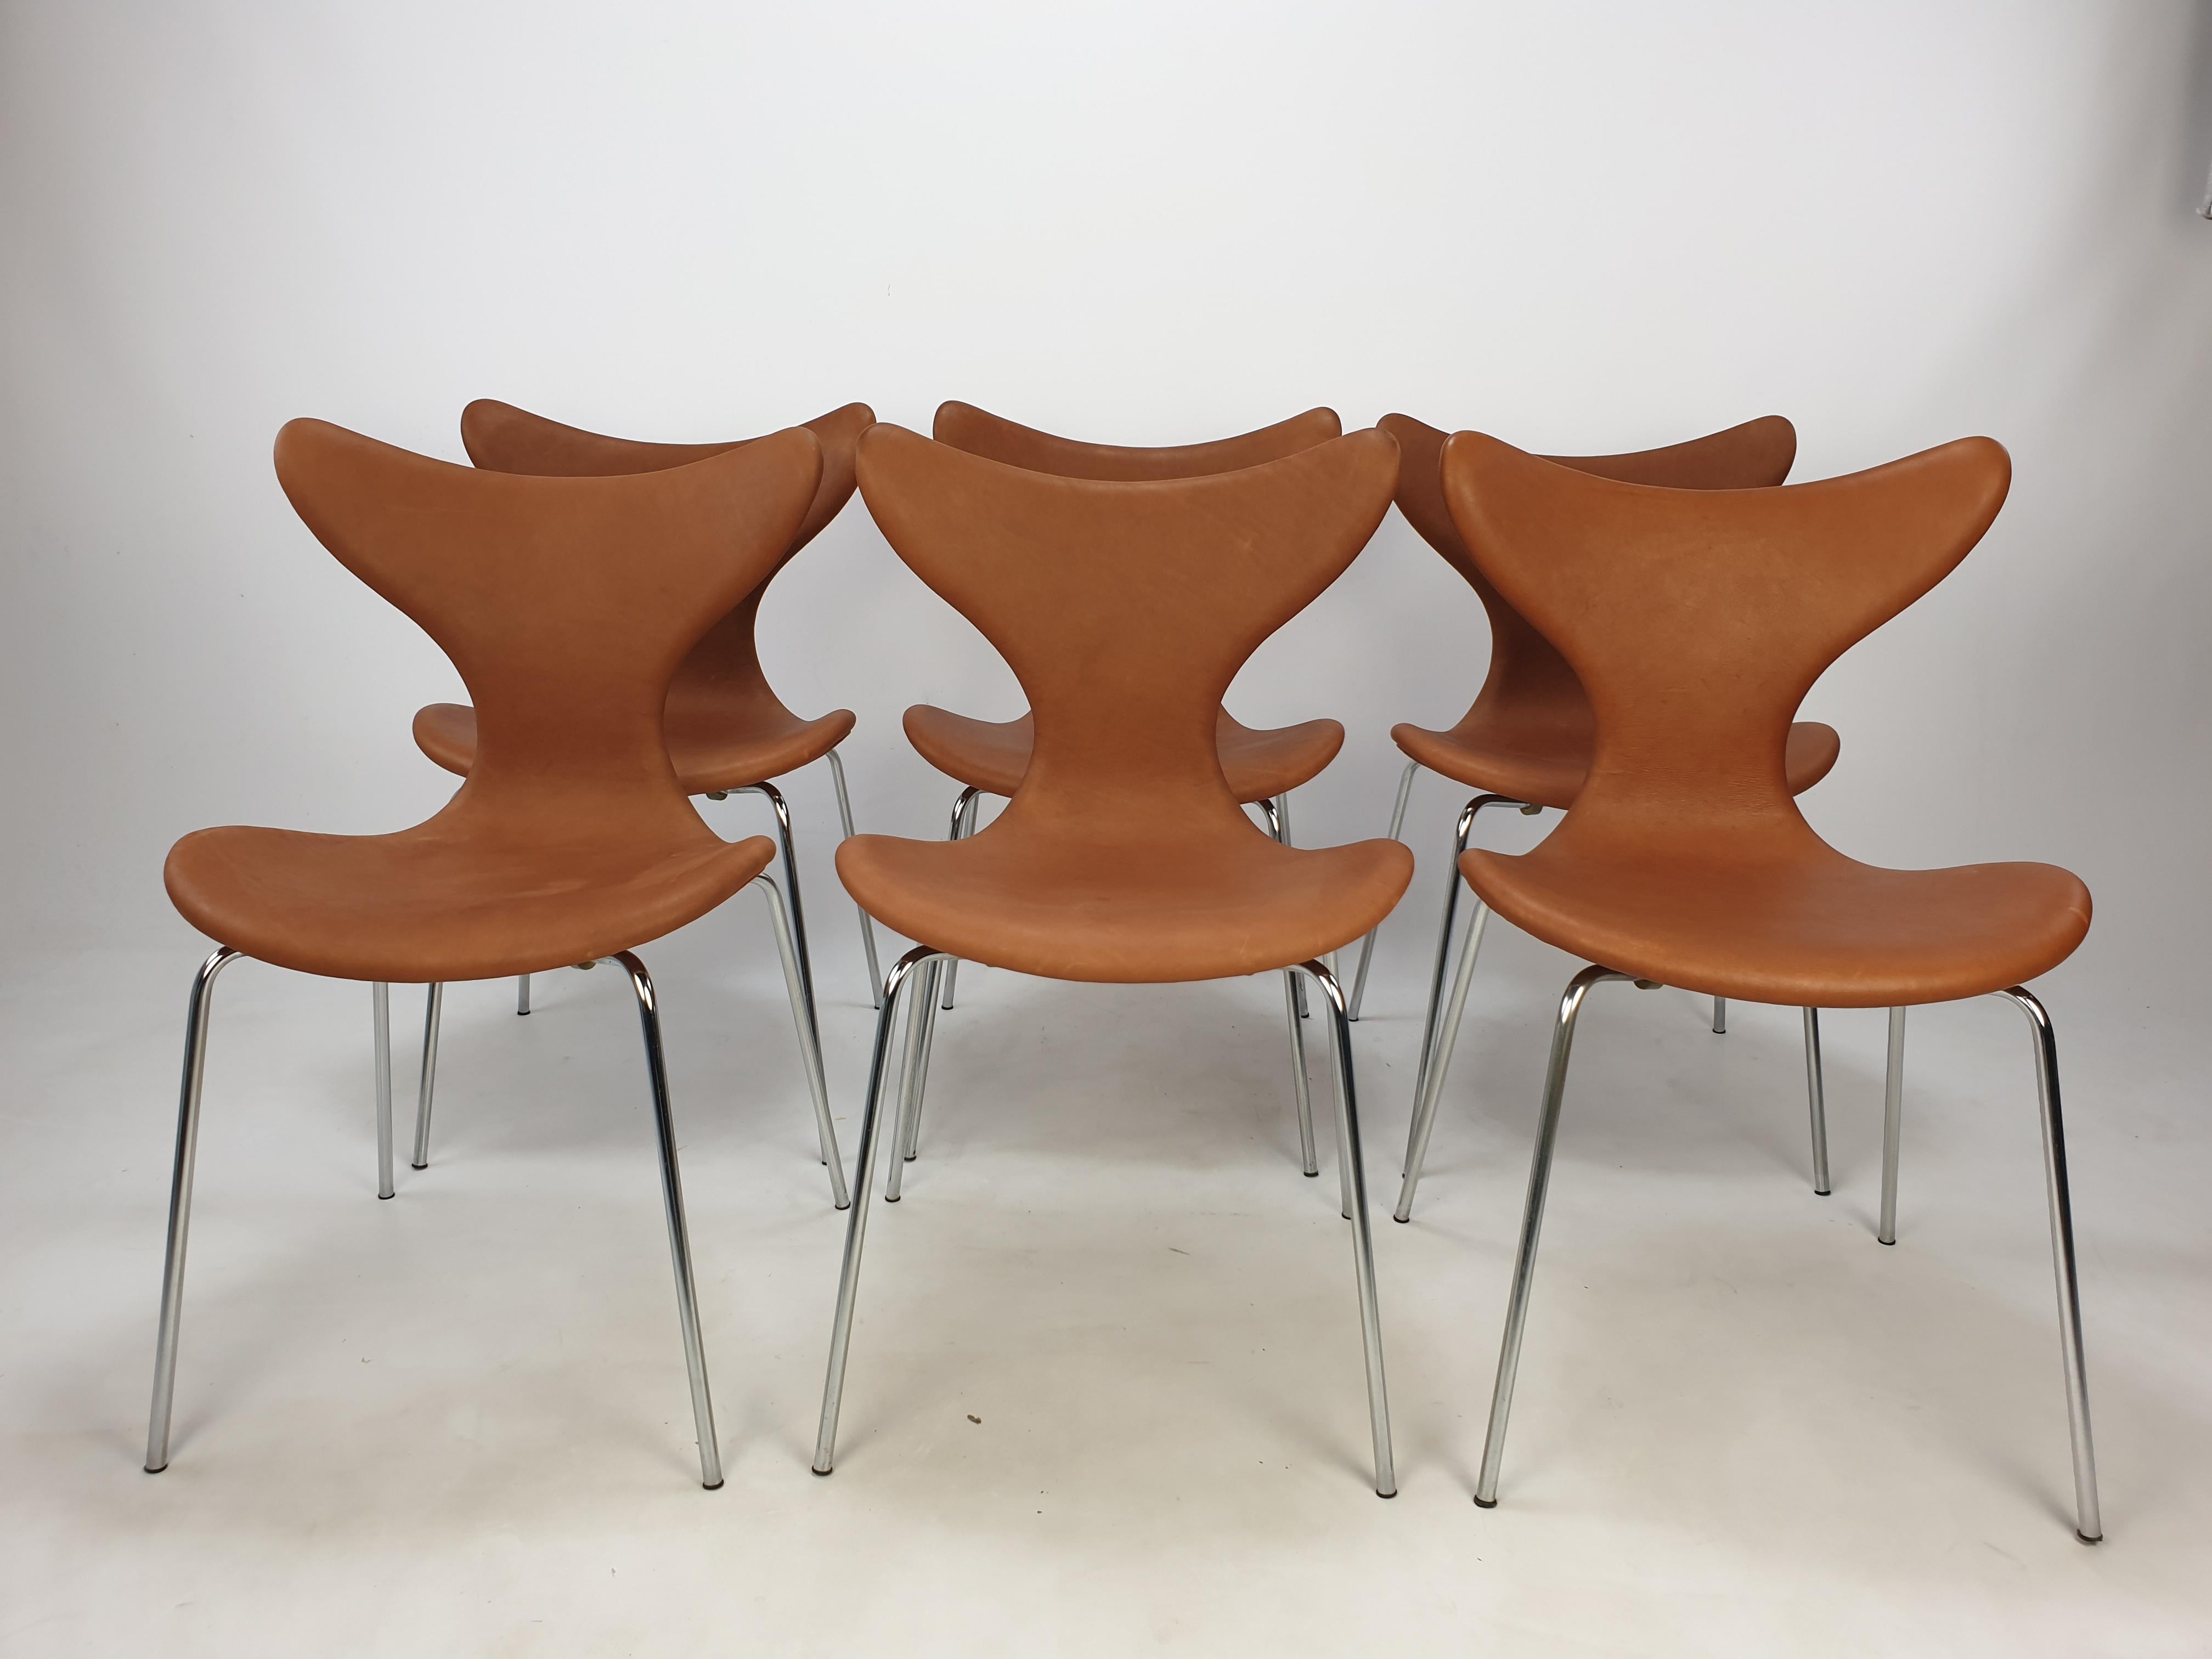 Mid-20th Century Set of 6 Lily Chairs by Arne Jacobsen for Fritz Hansen, 1960s For Sale